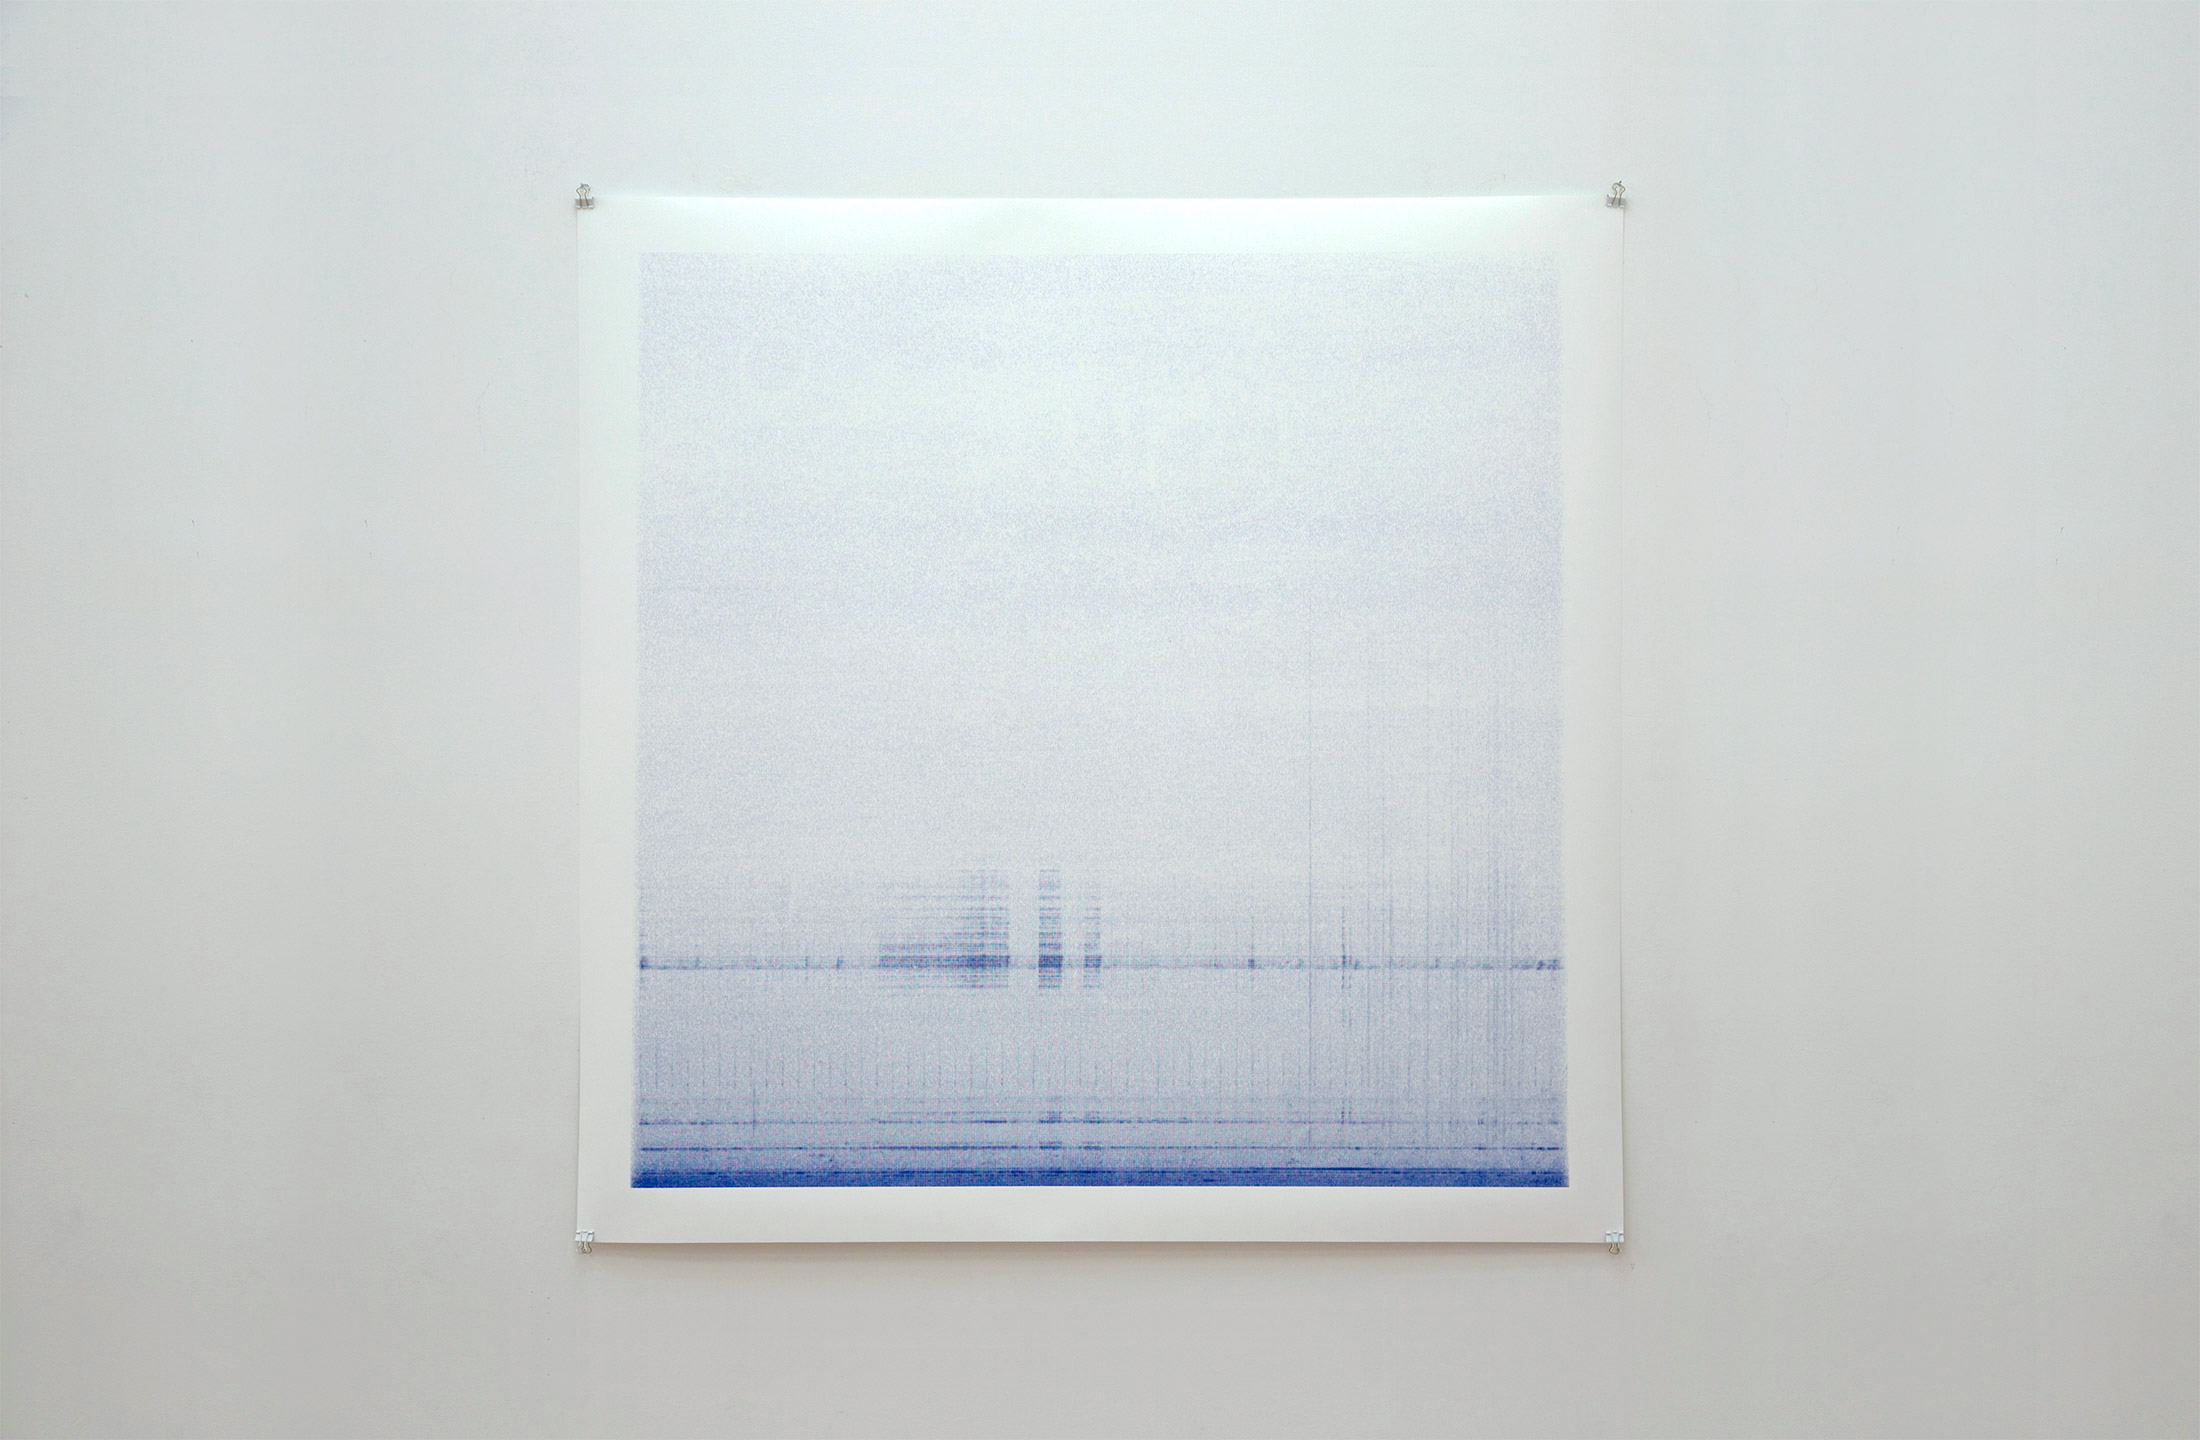 Minute/Year (2016), Day 14 — Screen-print, as installed during the Minute/Year (2016) exhibition in Lite-Haus Galerie, Berlin, January 2017